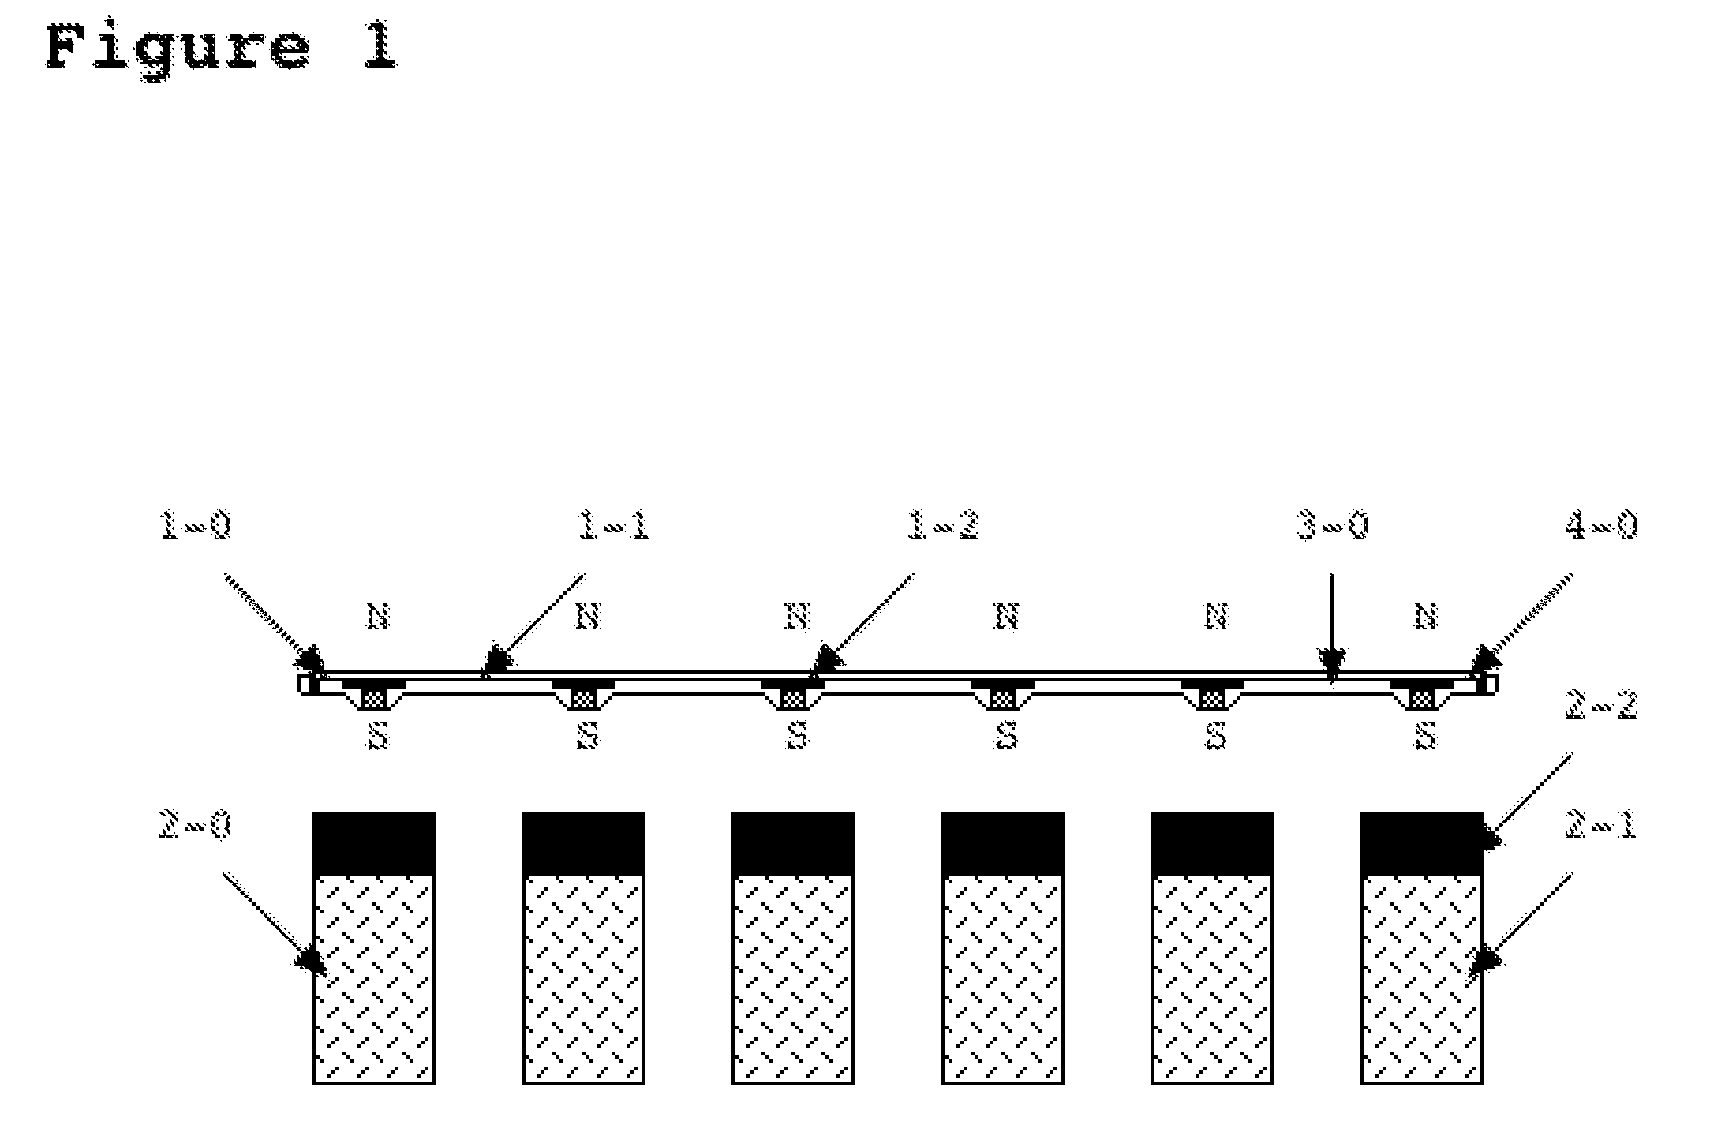 Magnetically-hanging spice dispenser with a continuously-variable hole-size selector